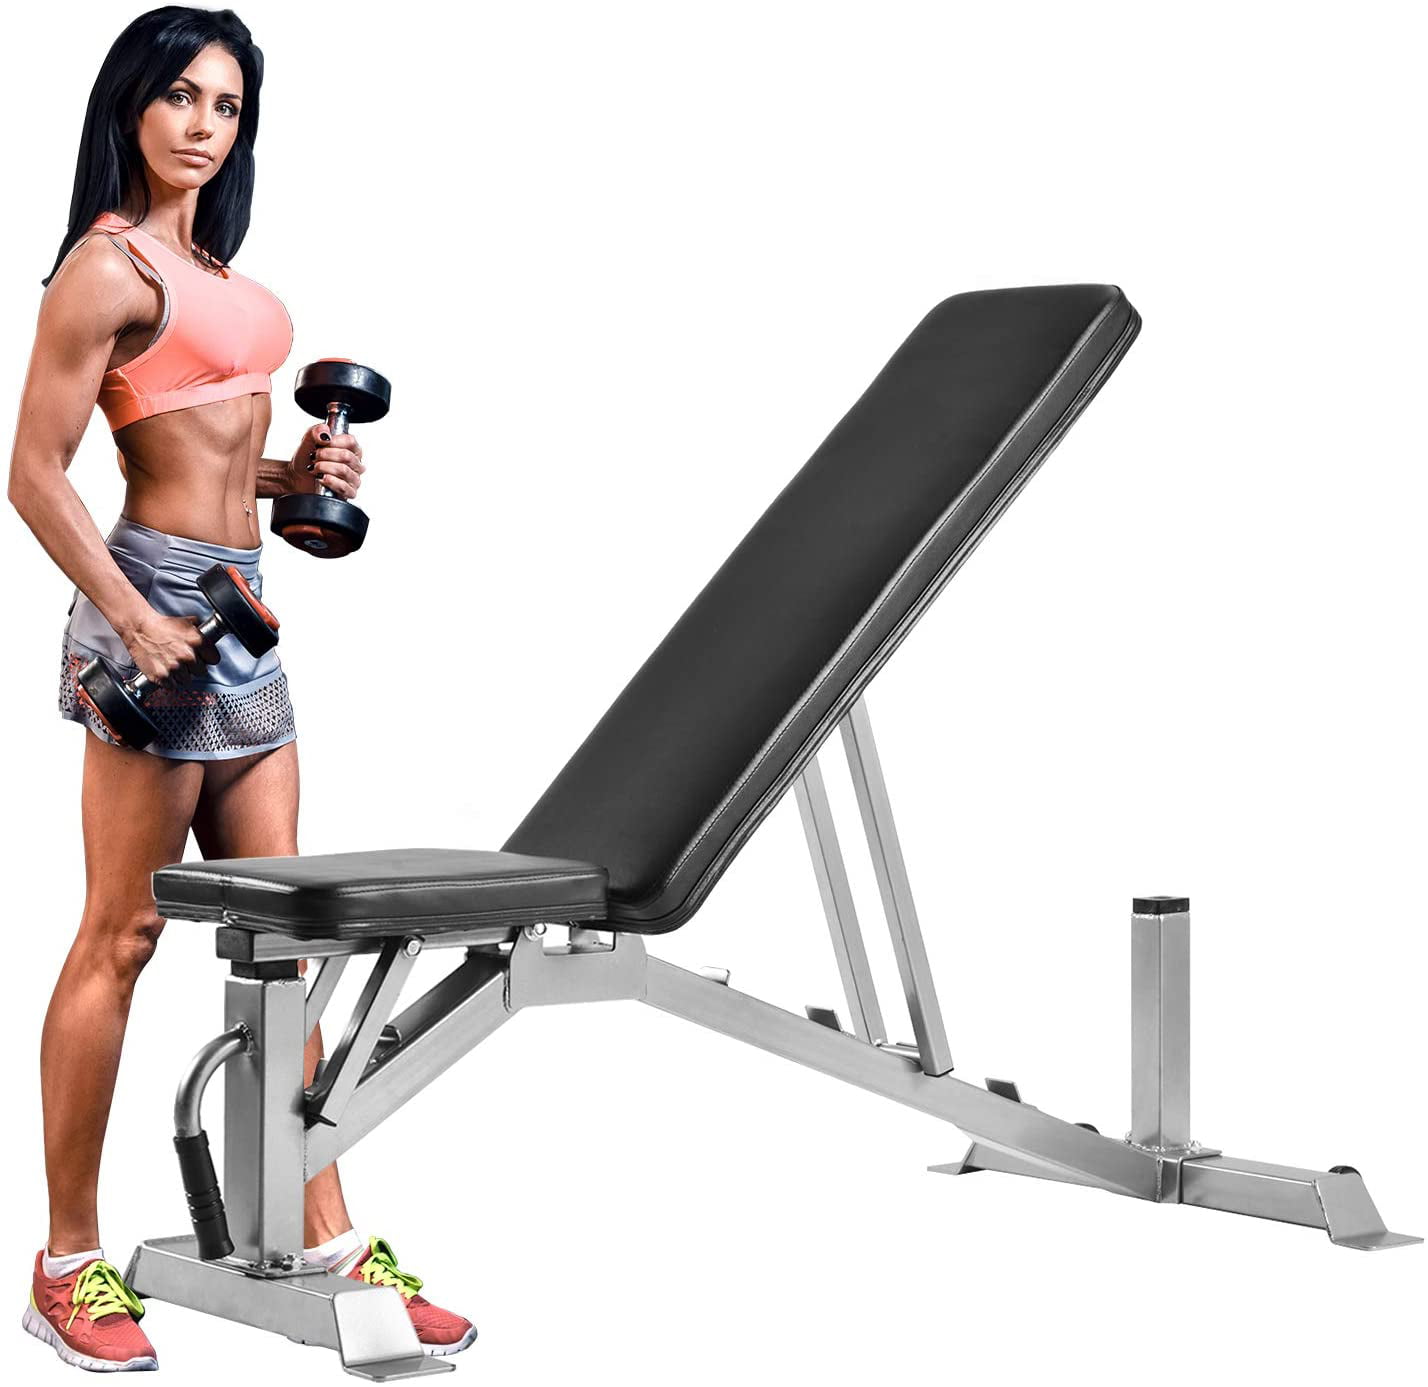 Details about   Weight Lifting Bench Workout Squat Rack Barbell,Adjustable Decline Bench Sit Up 